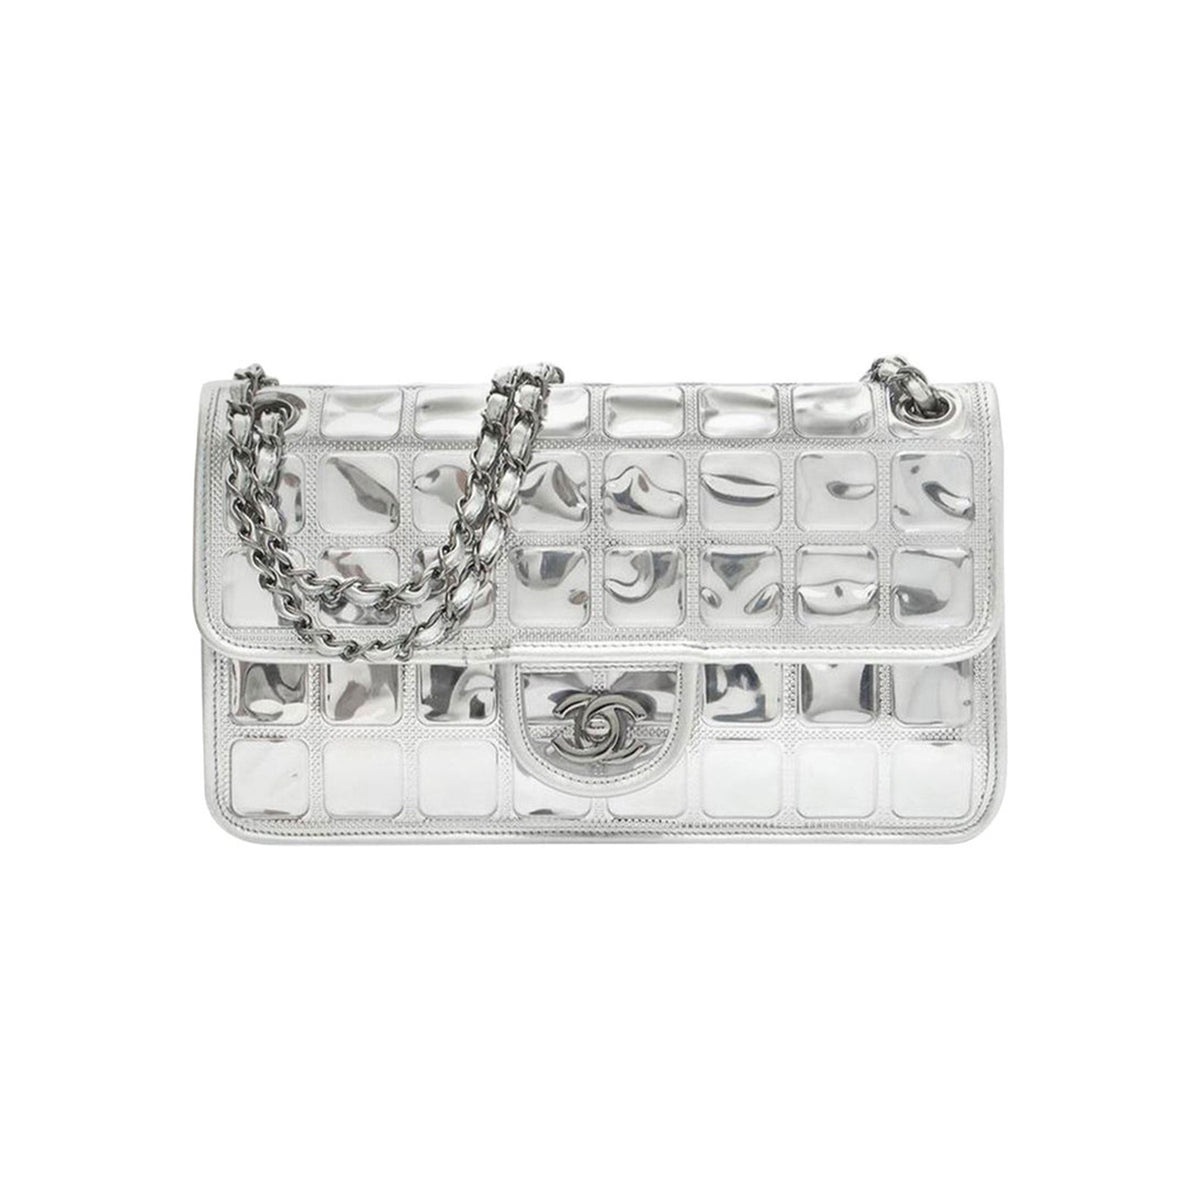 CHANEL Vinyl Ice Cube Large Shopper Tote Silver 293921